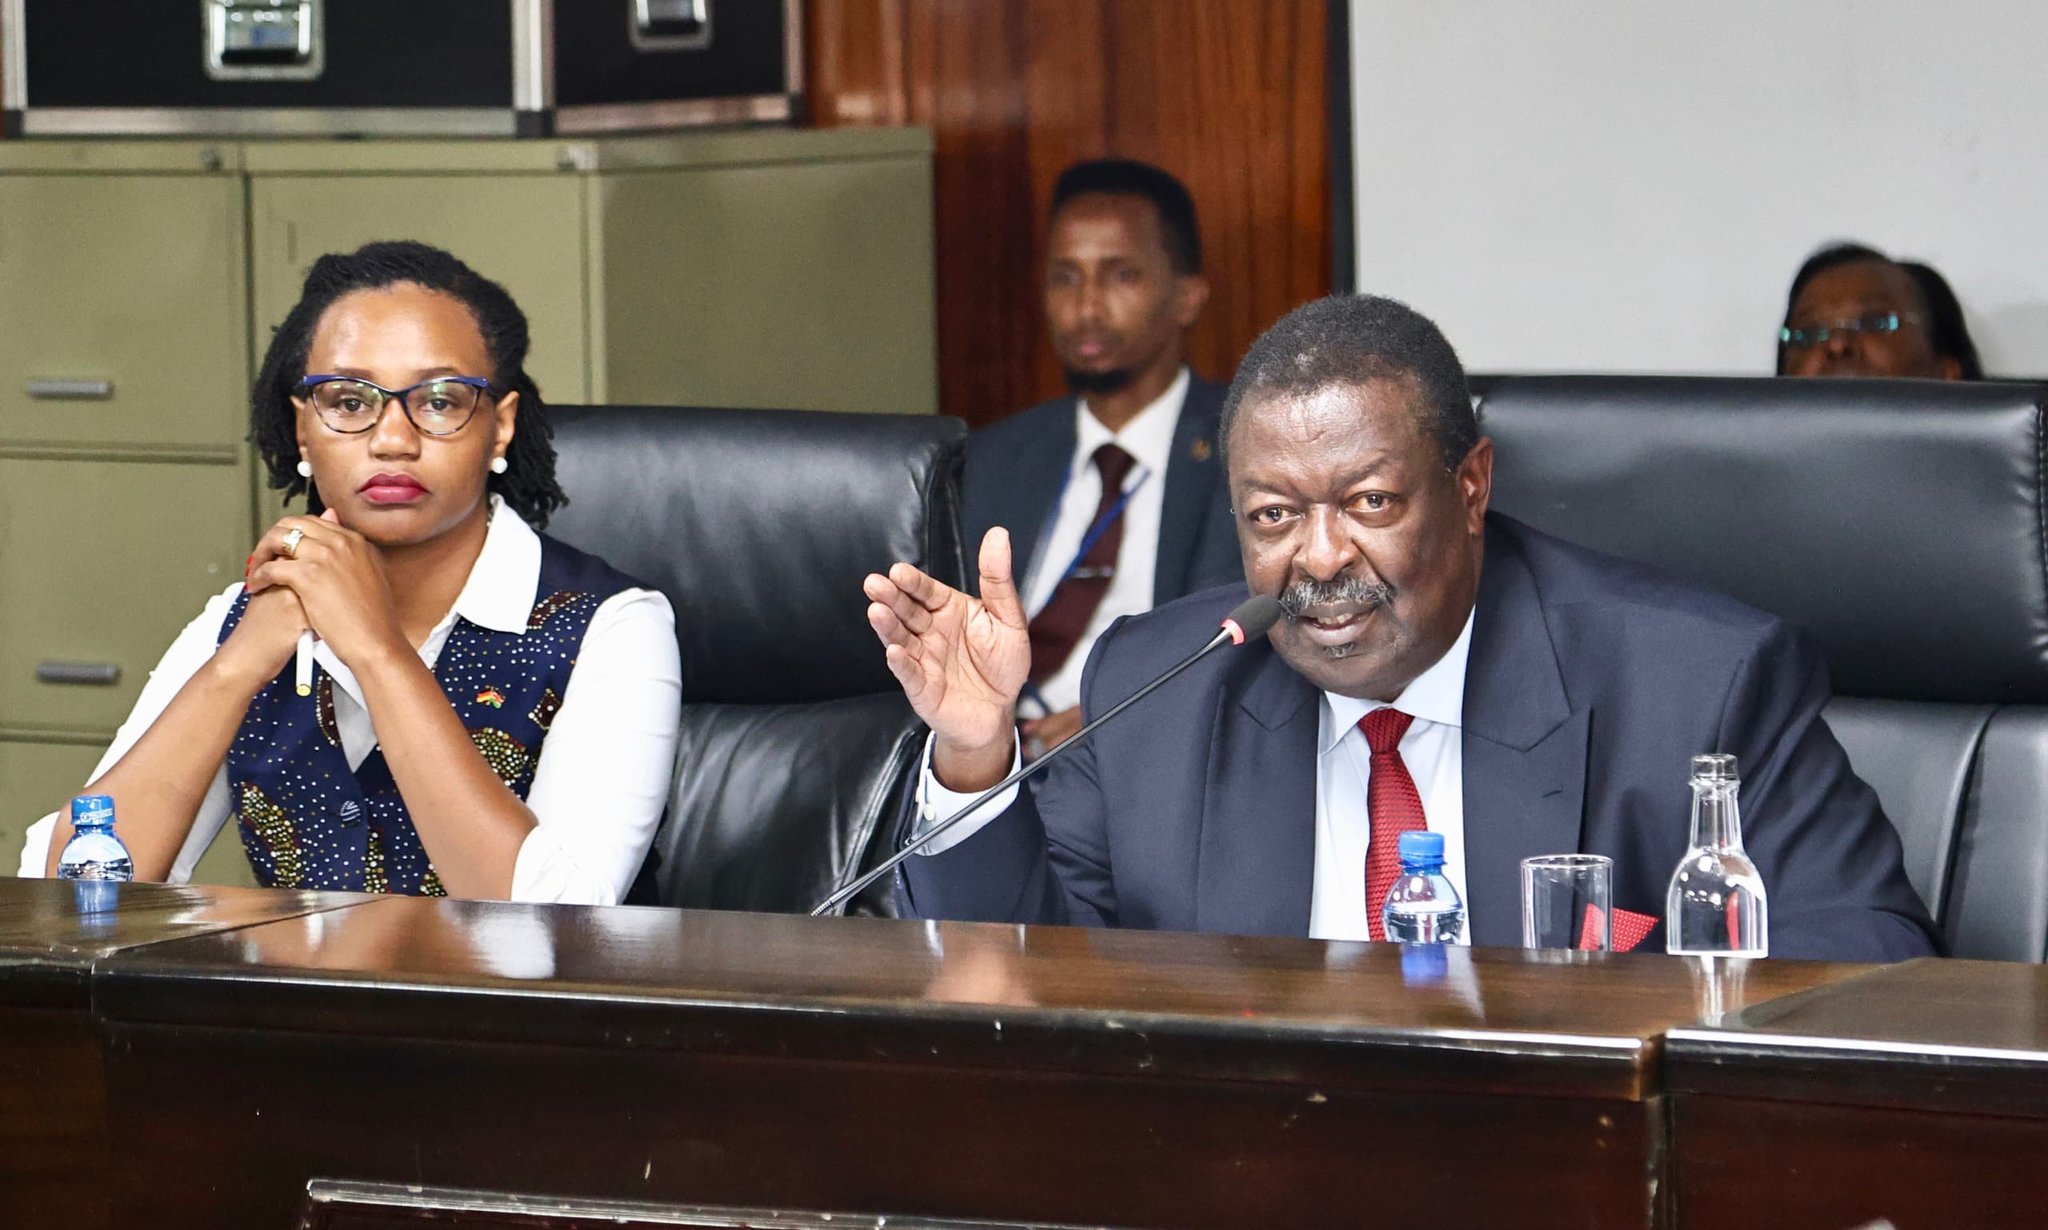 PCS Musalia Mudavadi appearing before the National Assembly Defence, Intelligence, and Foreign Relations Committee.